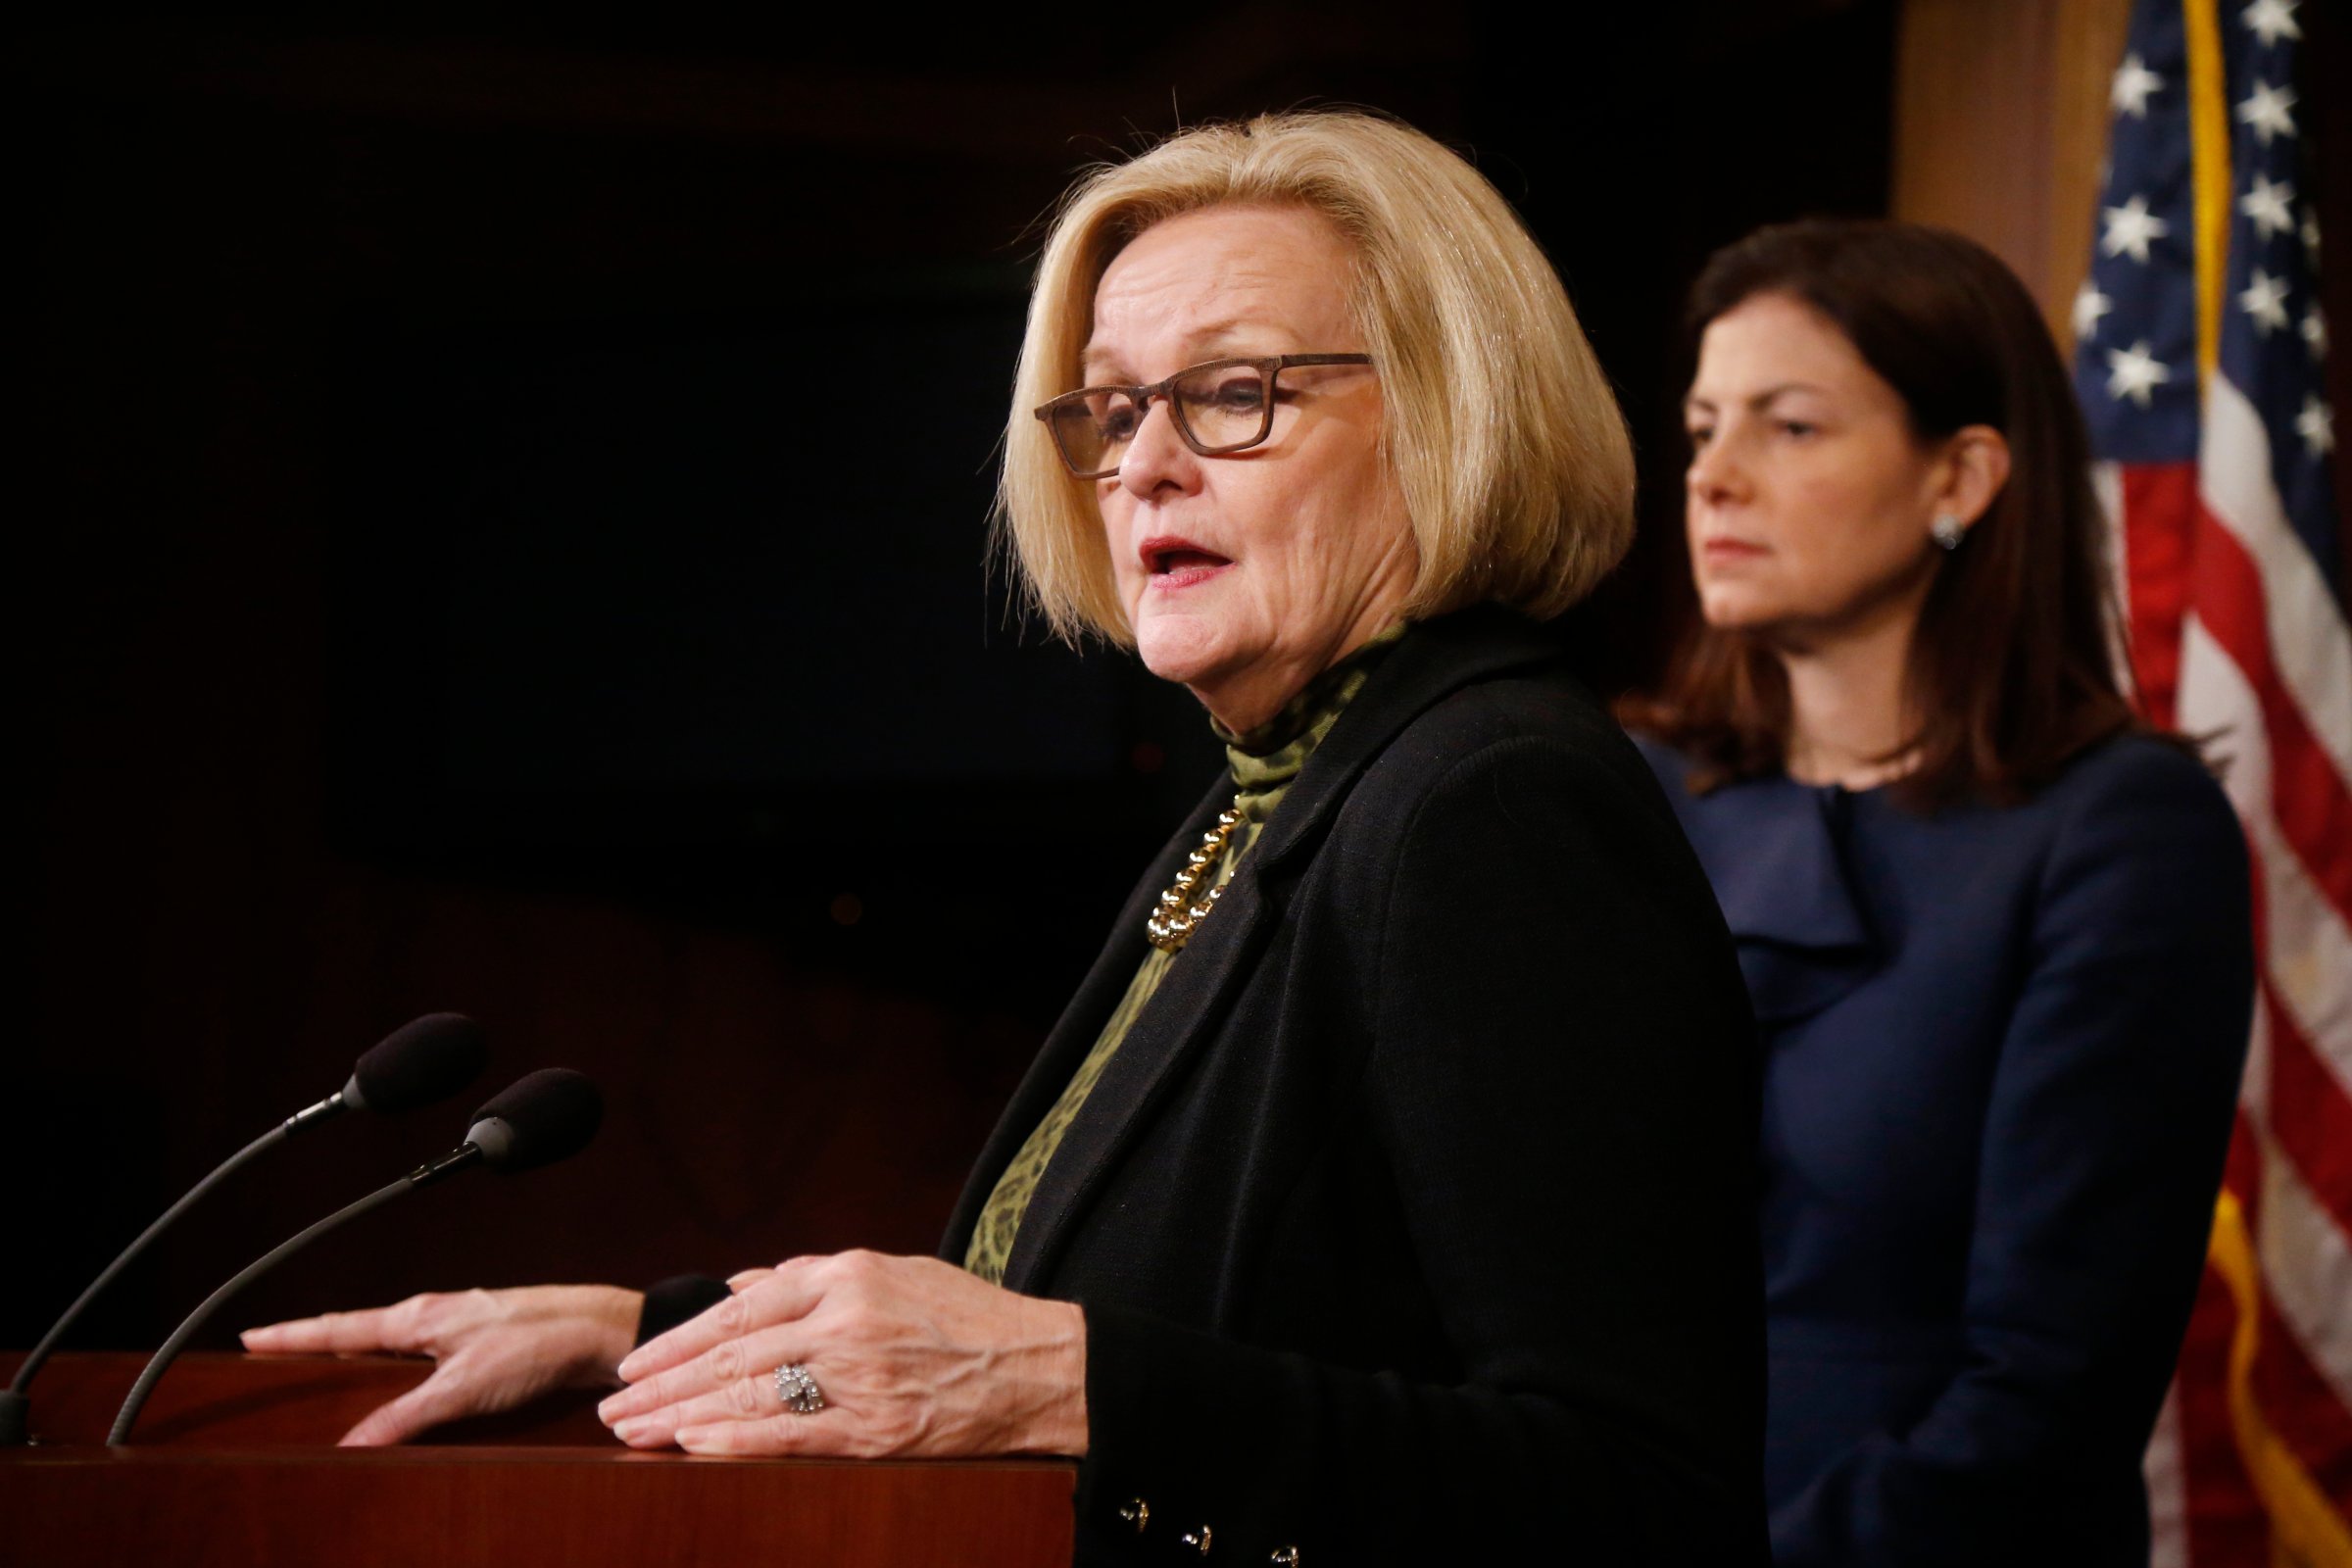 From left: Senator Claire McCaskill and Senator Kelly Ayotte at a news conference on Capitol Hill in Washington, D.C., on March 6, 2014, following a Senate vote on military sexual assaults .